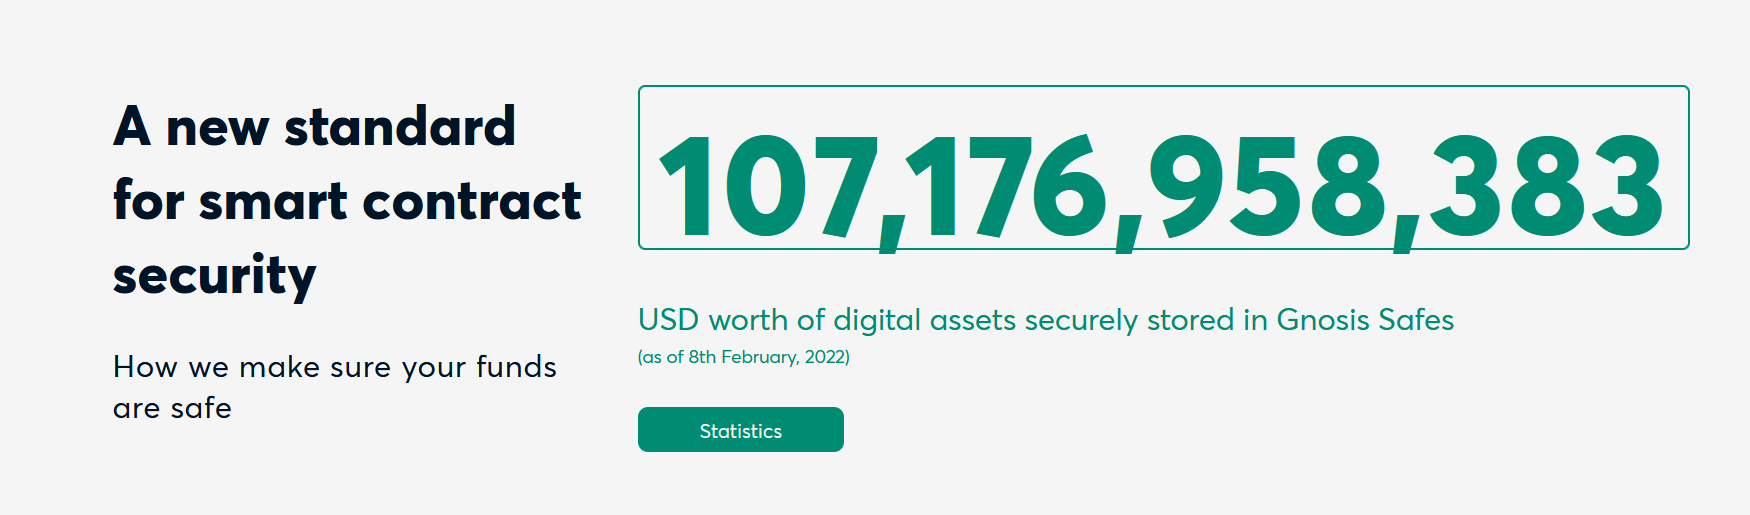 Gnosis safe, a multisig in Ethereum, manages over 100B USD as of today